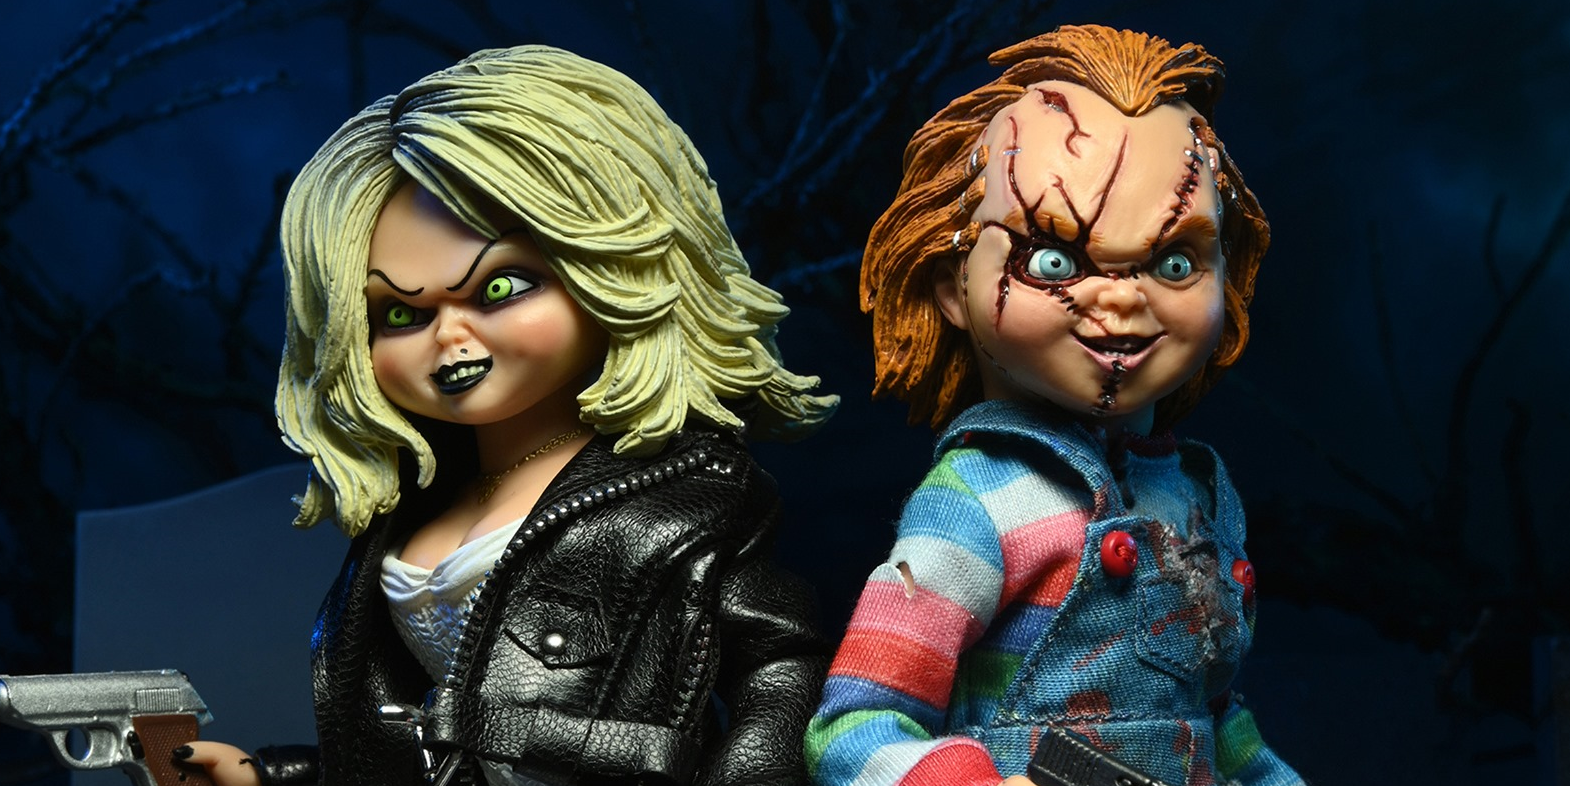 NECA Brings Chucky and Tiffany Back to the Toy Shelf With New Clothed Action  Figure 2-Pack! - Bloody Disgusting